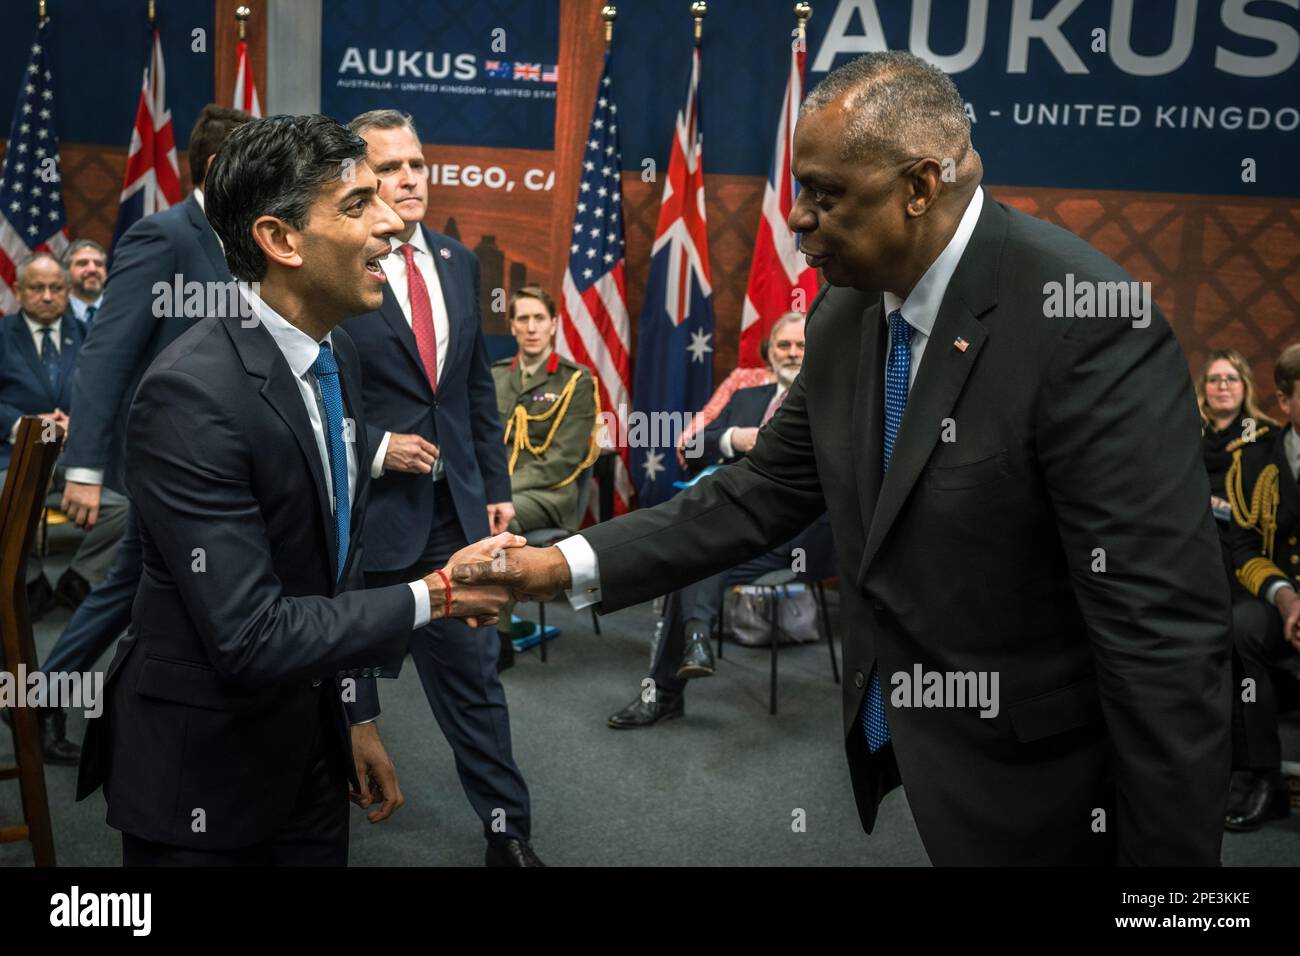 San Diego, United States of America. 13 March, 2023. U.S Secretary of Defense Lloyd Austin, right, greets British Prime Minister Rishi Sunak, left, during a trilateral meeting with at Point Loma naval base March 13, 2023 in San Diego, California. The three leaders of the AUKUS security pact agreed on expanding their nuclear-powered submarine fleet.  Credit: Chad McNeeley/DoD Photo/Alamy Live News Stock Photo